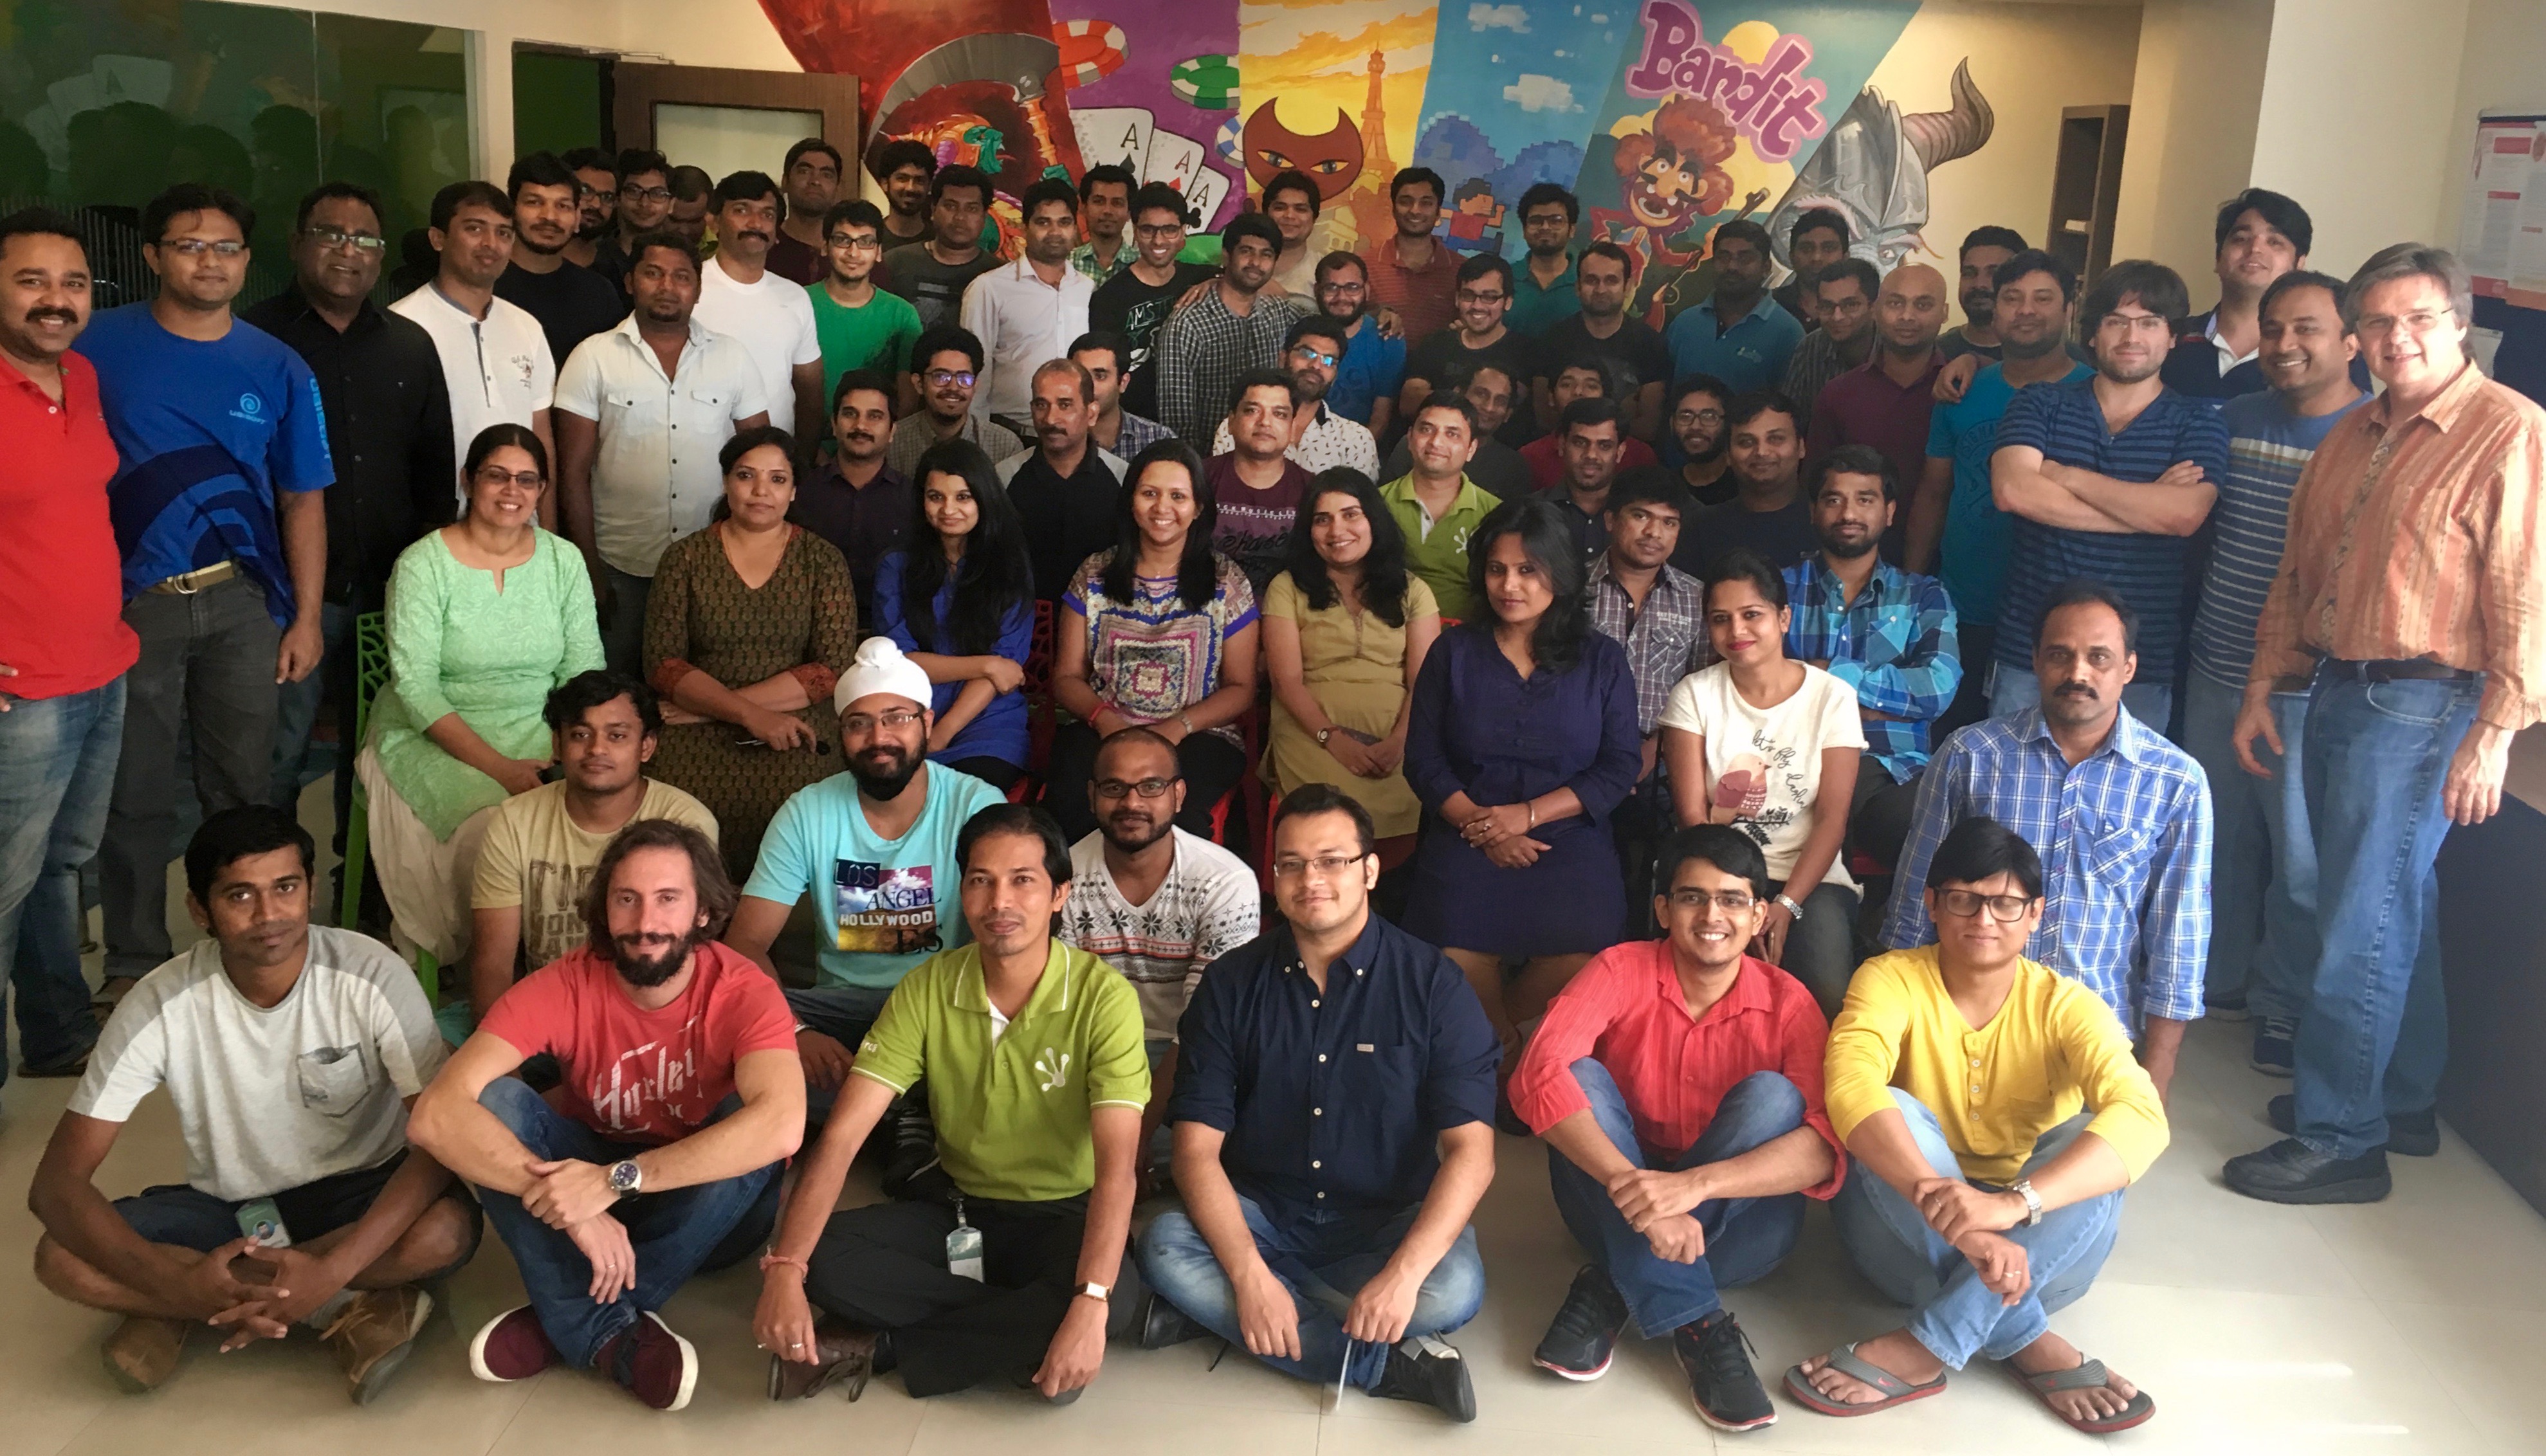 Farmville Co-Creator Mark Skaggs Joins Indian Mobile Gaming Startup Moonfrog Labs | TechCrunch